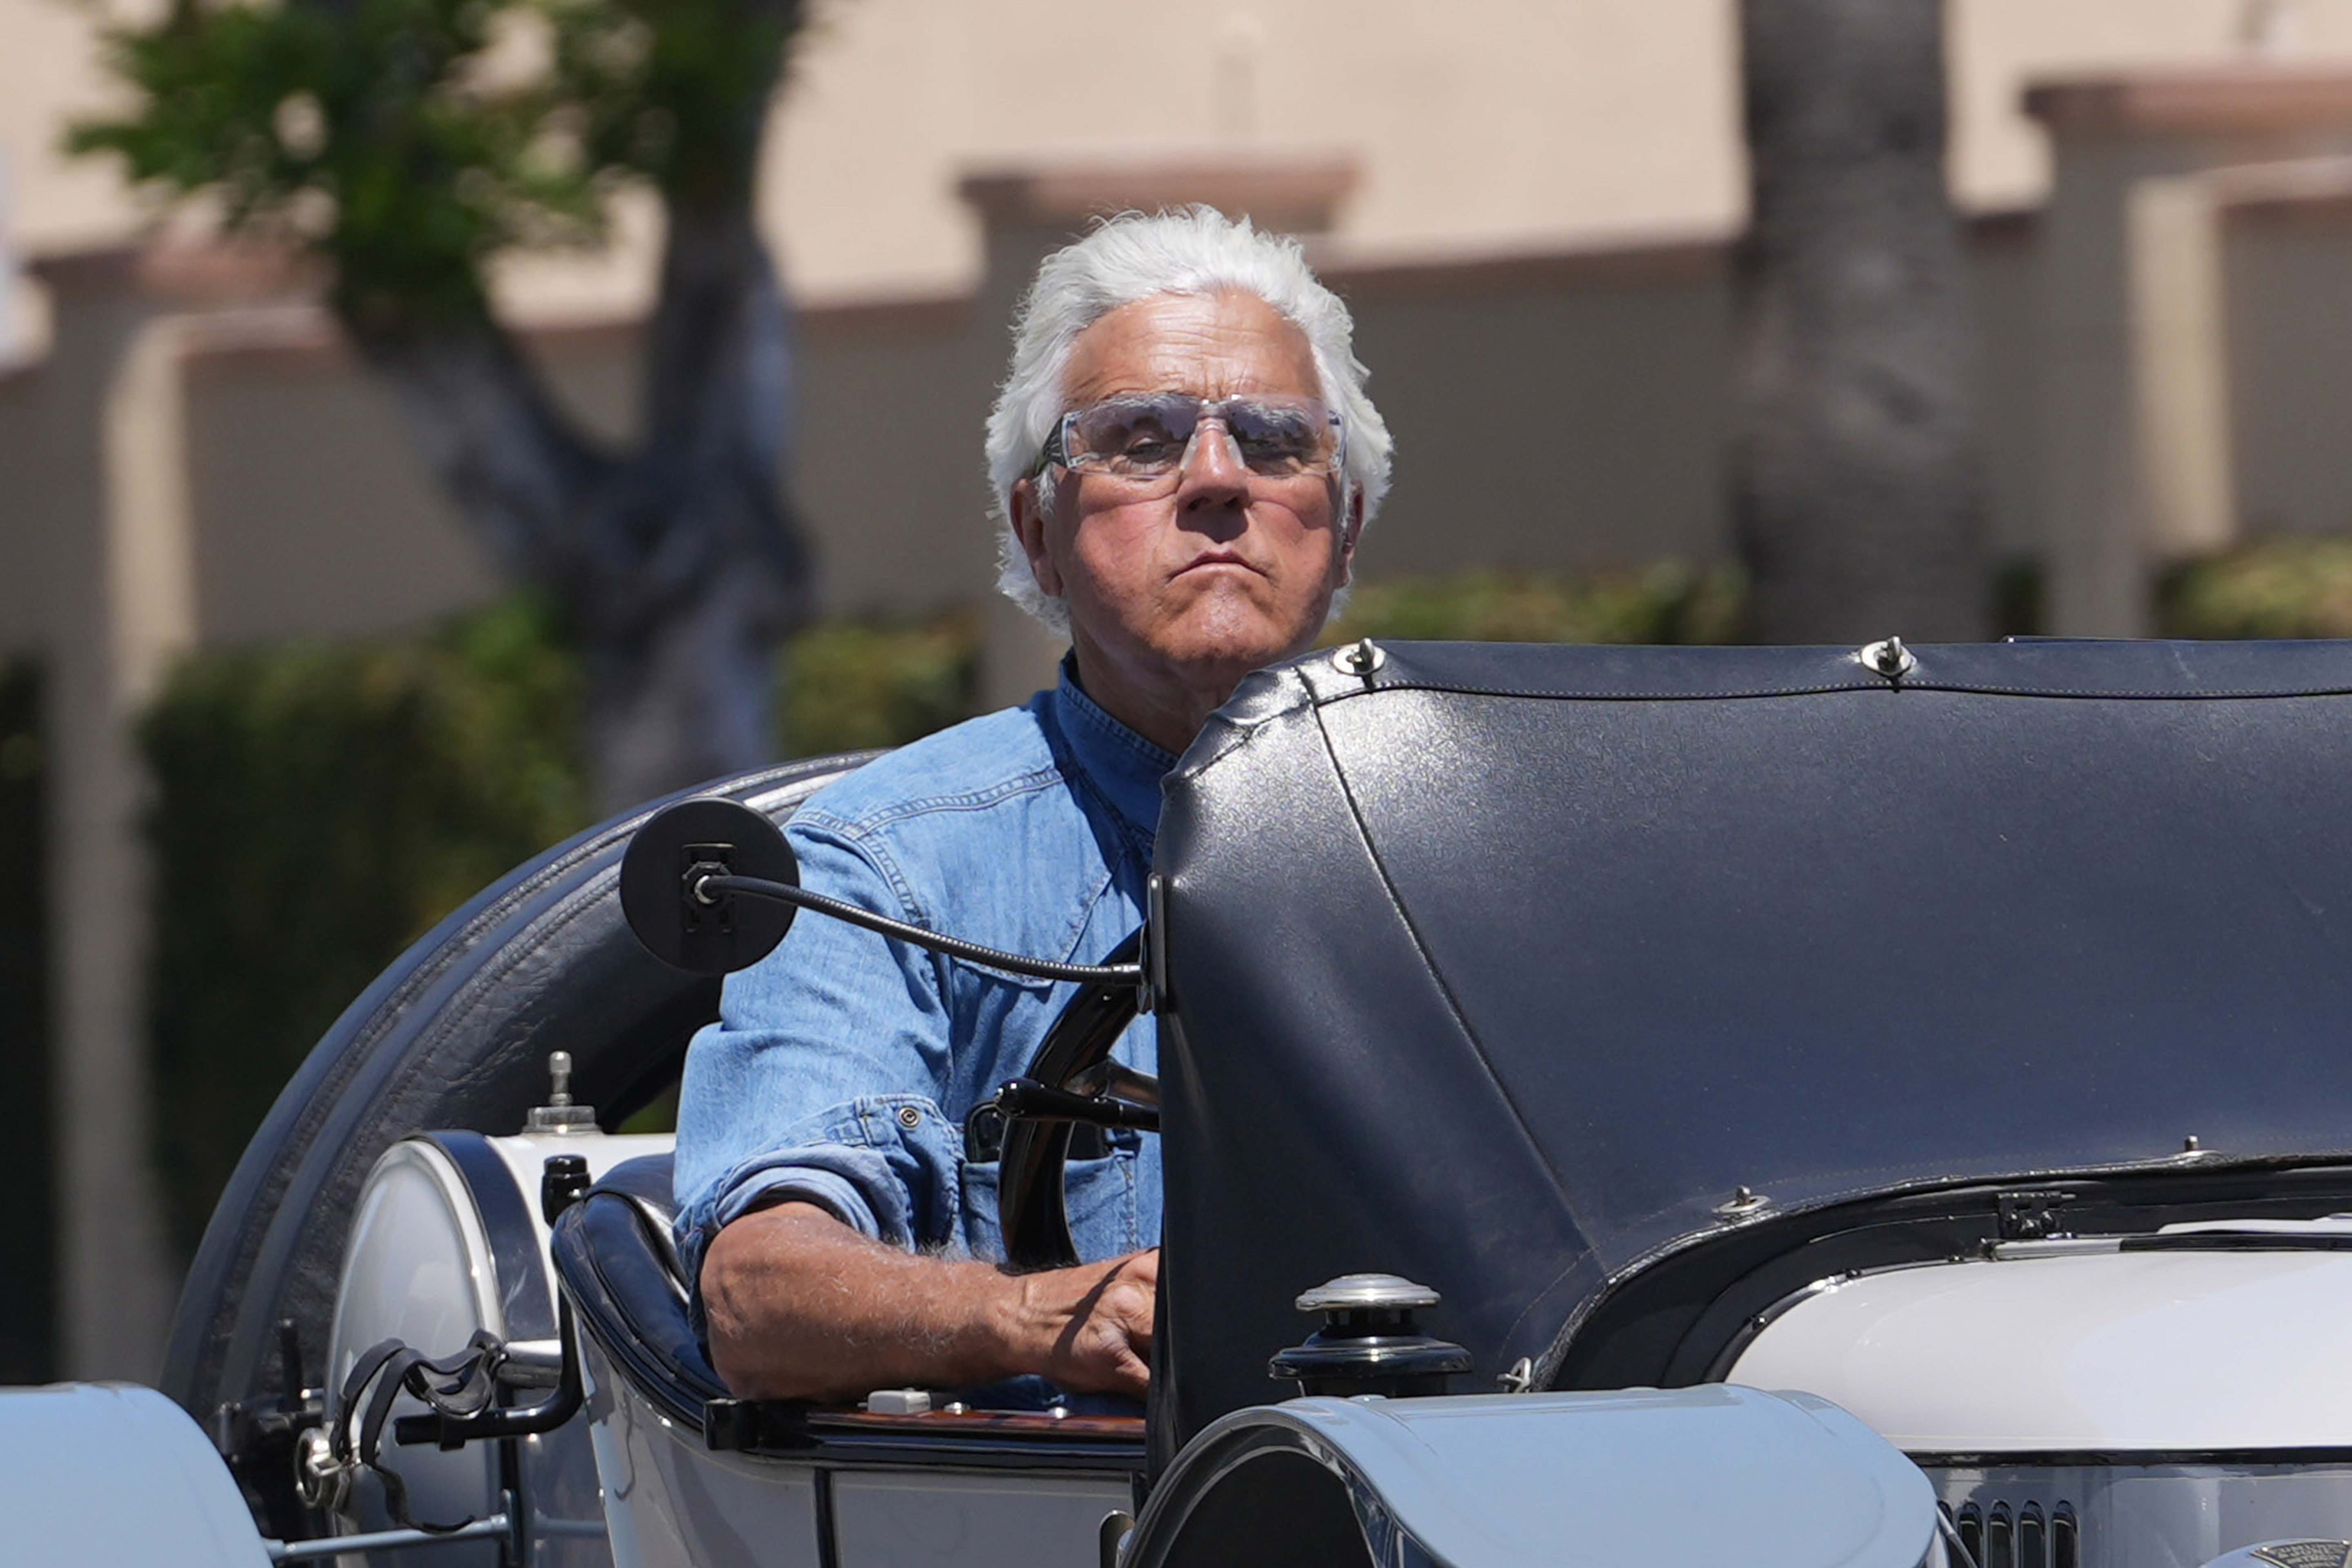 Jay Leno, seen riding in his Stanley Roadster in Los Angeles, has an impressive car collection